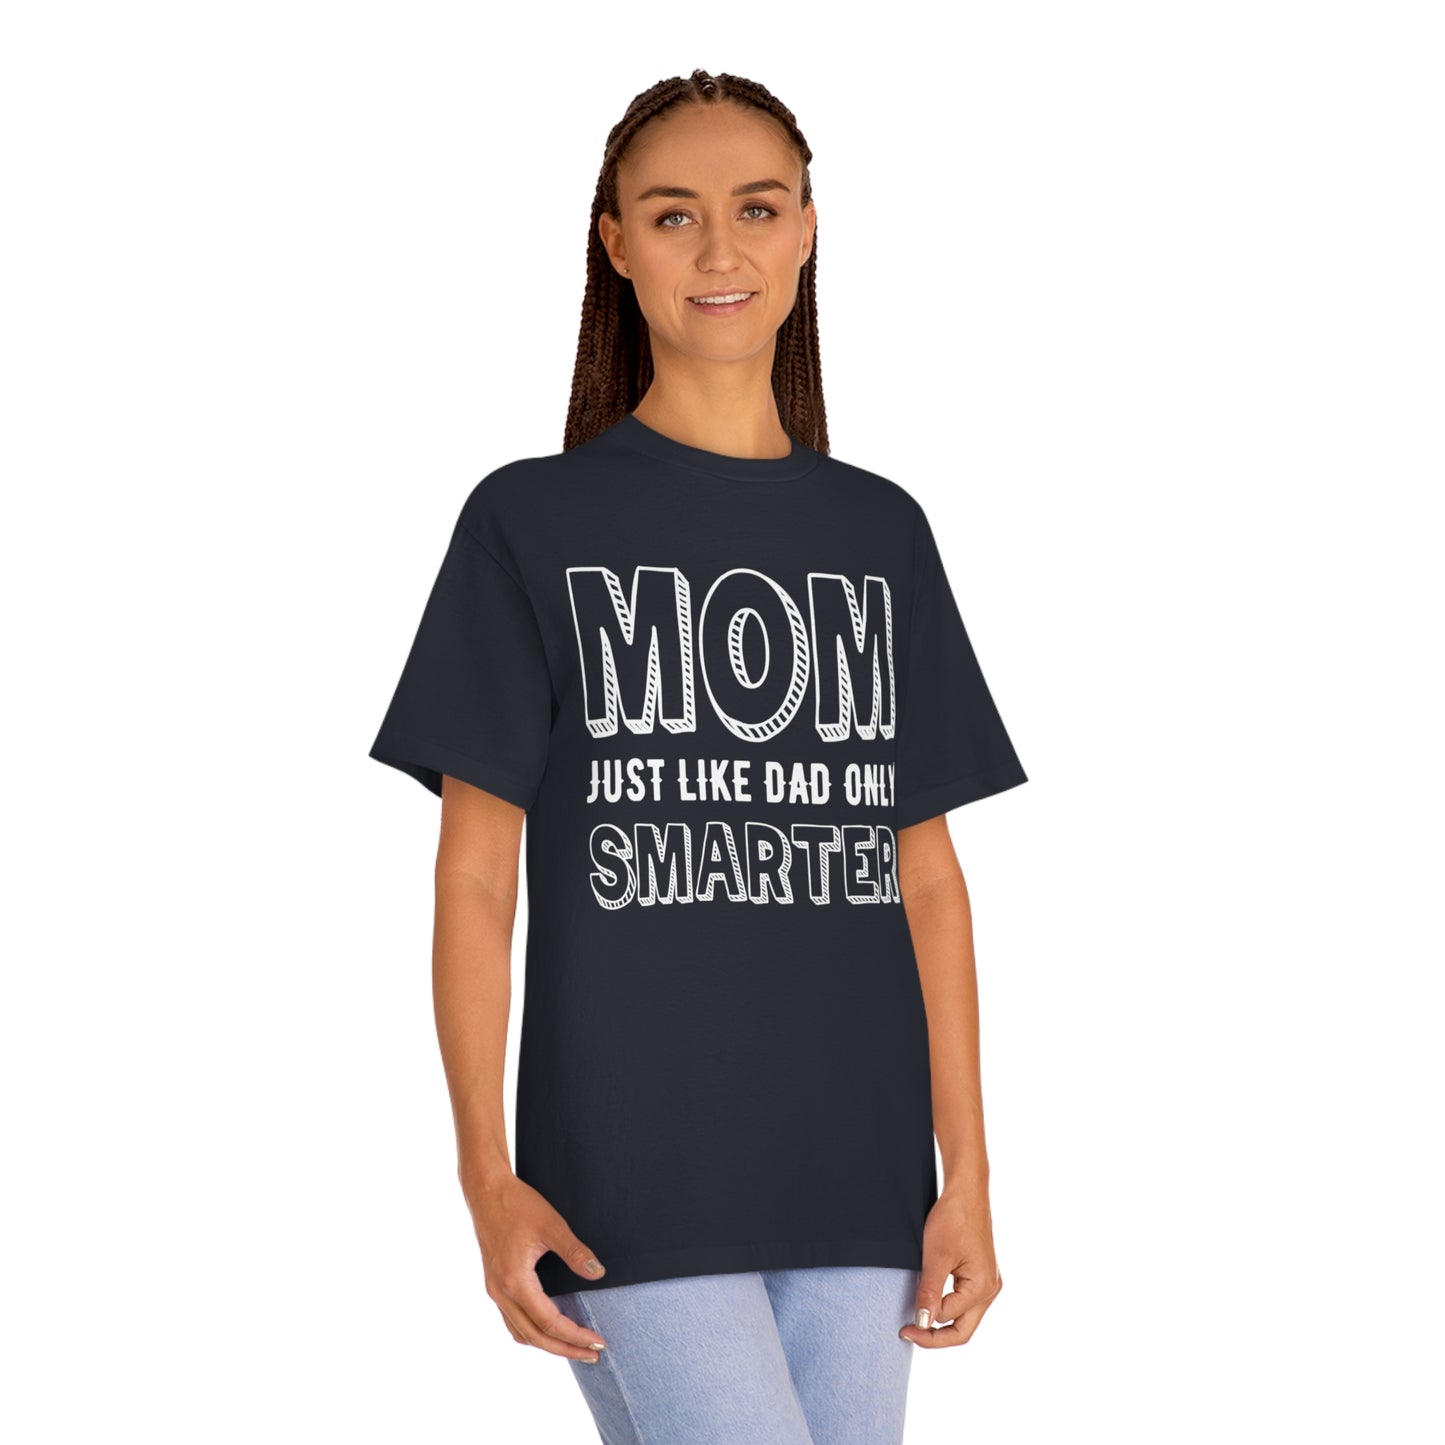 Mom just like dad only smarter Unisex Classic Tee